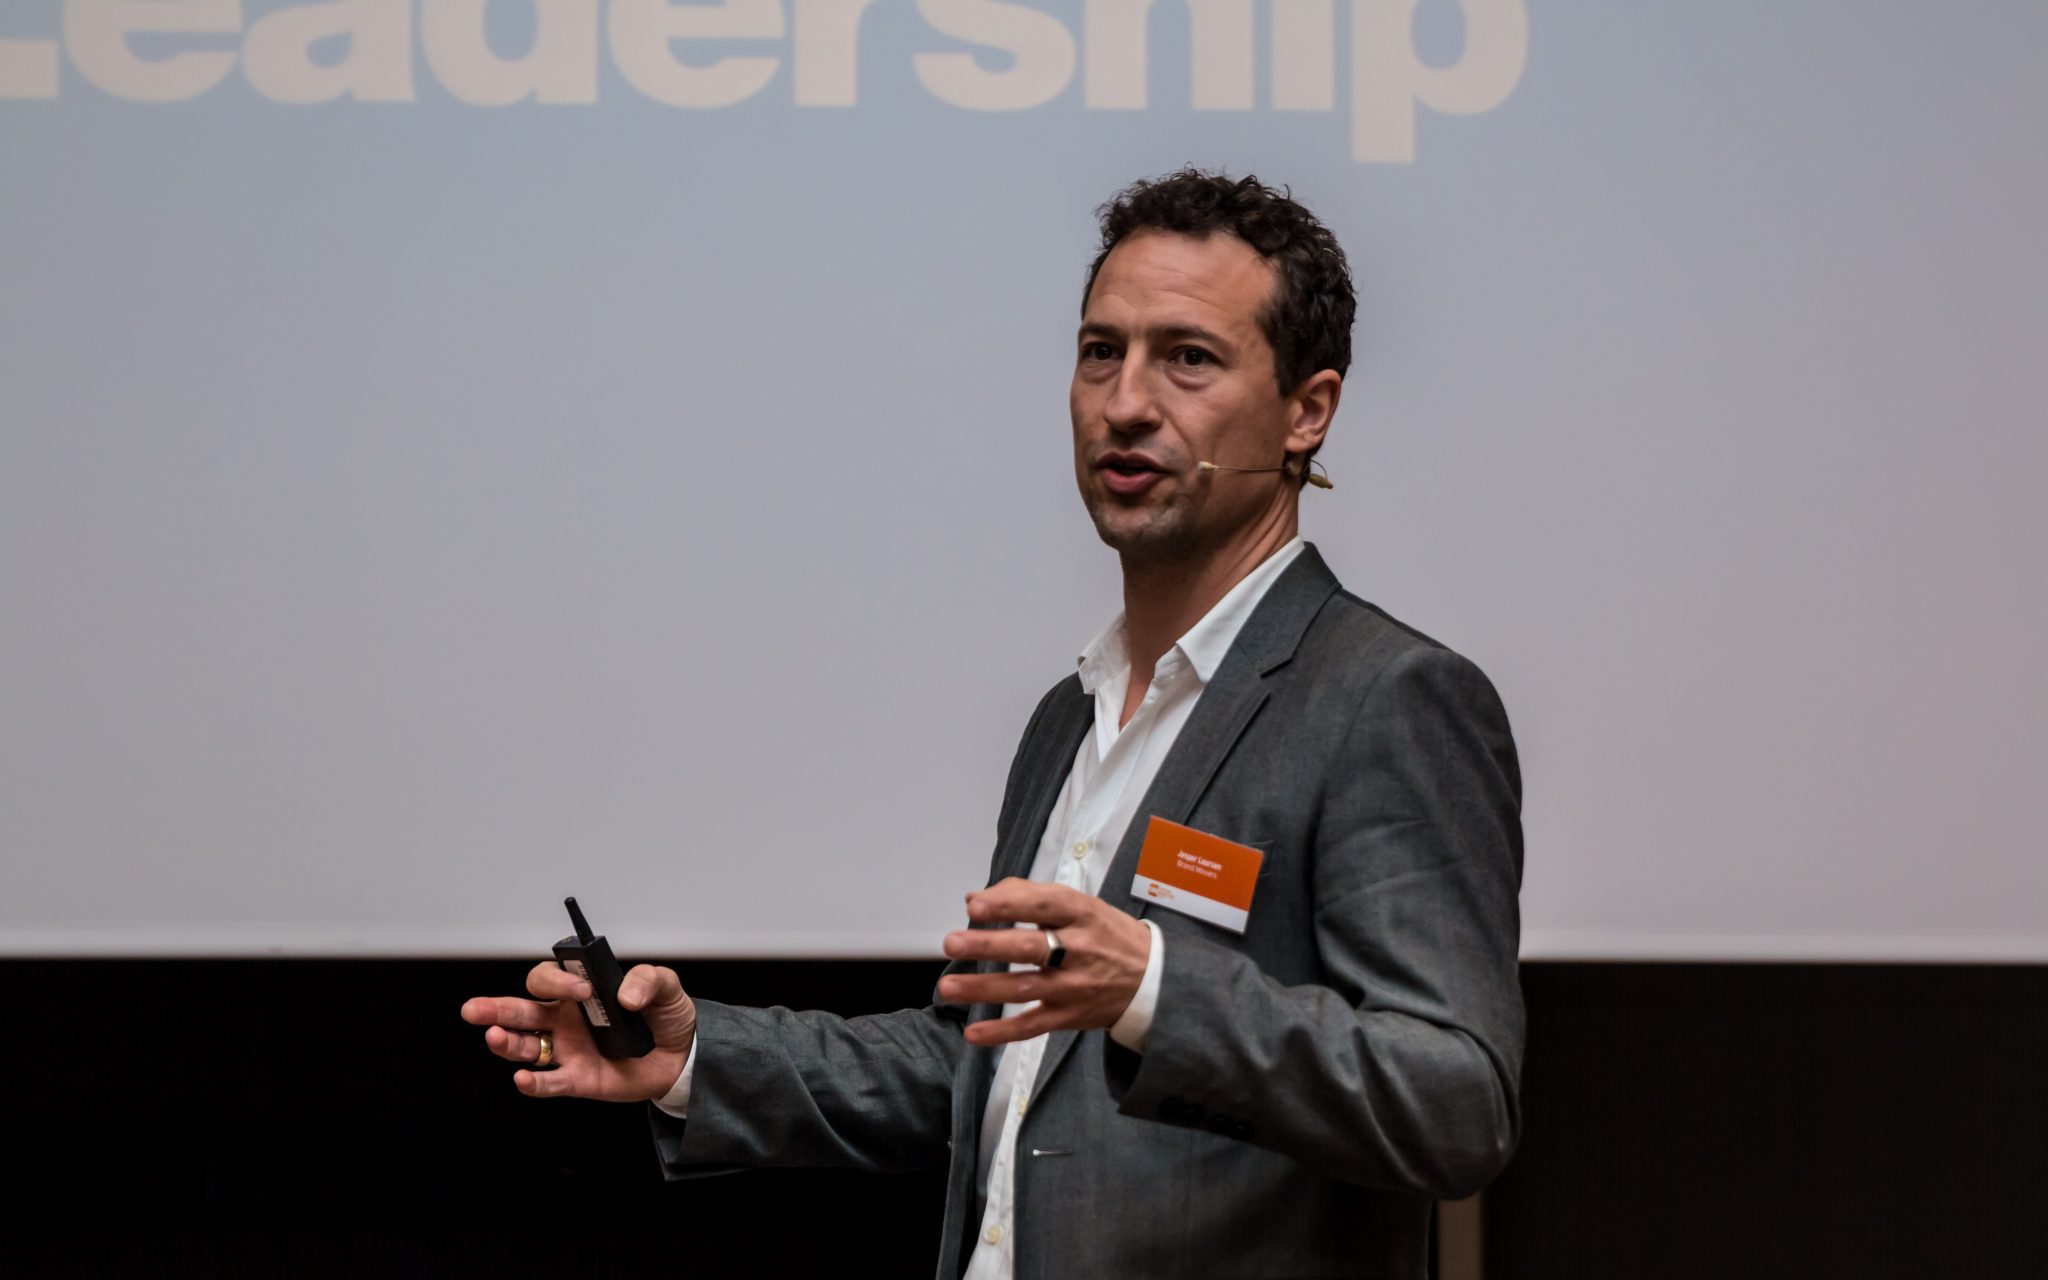 Jesper Laursen (CEO of Brand Movers): A successful entrepreneur needs to be a comeback kid